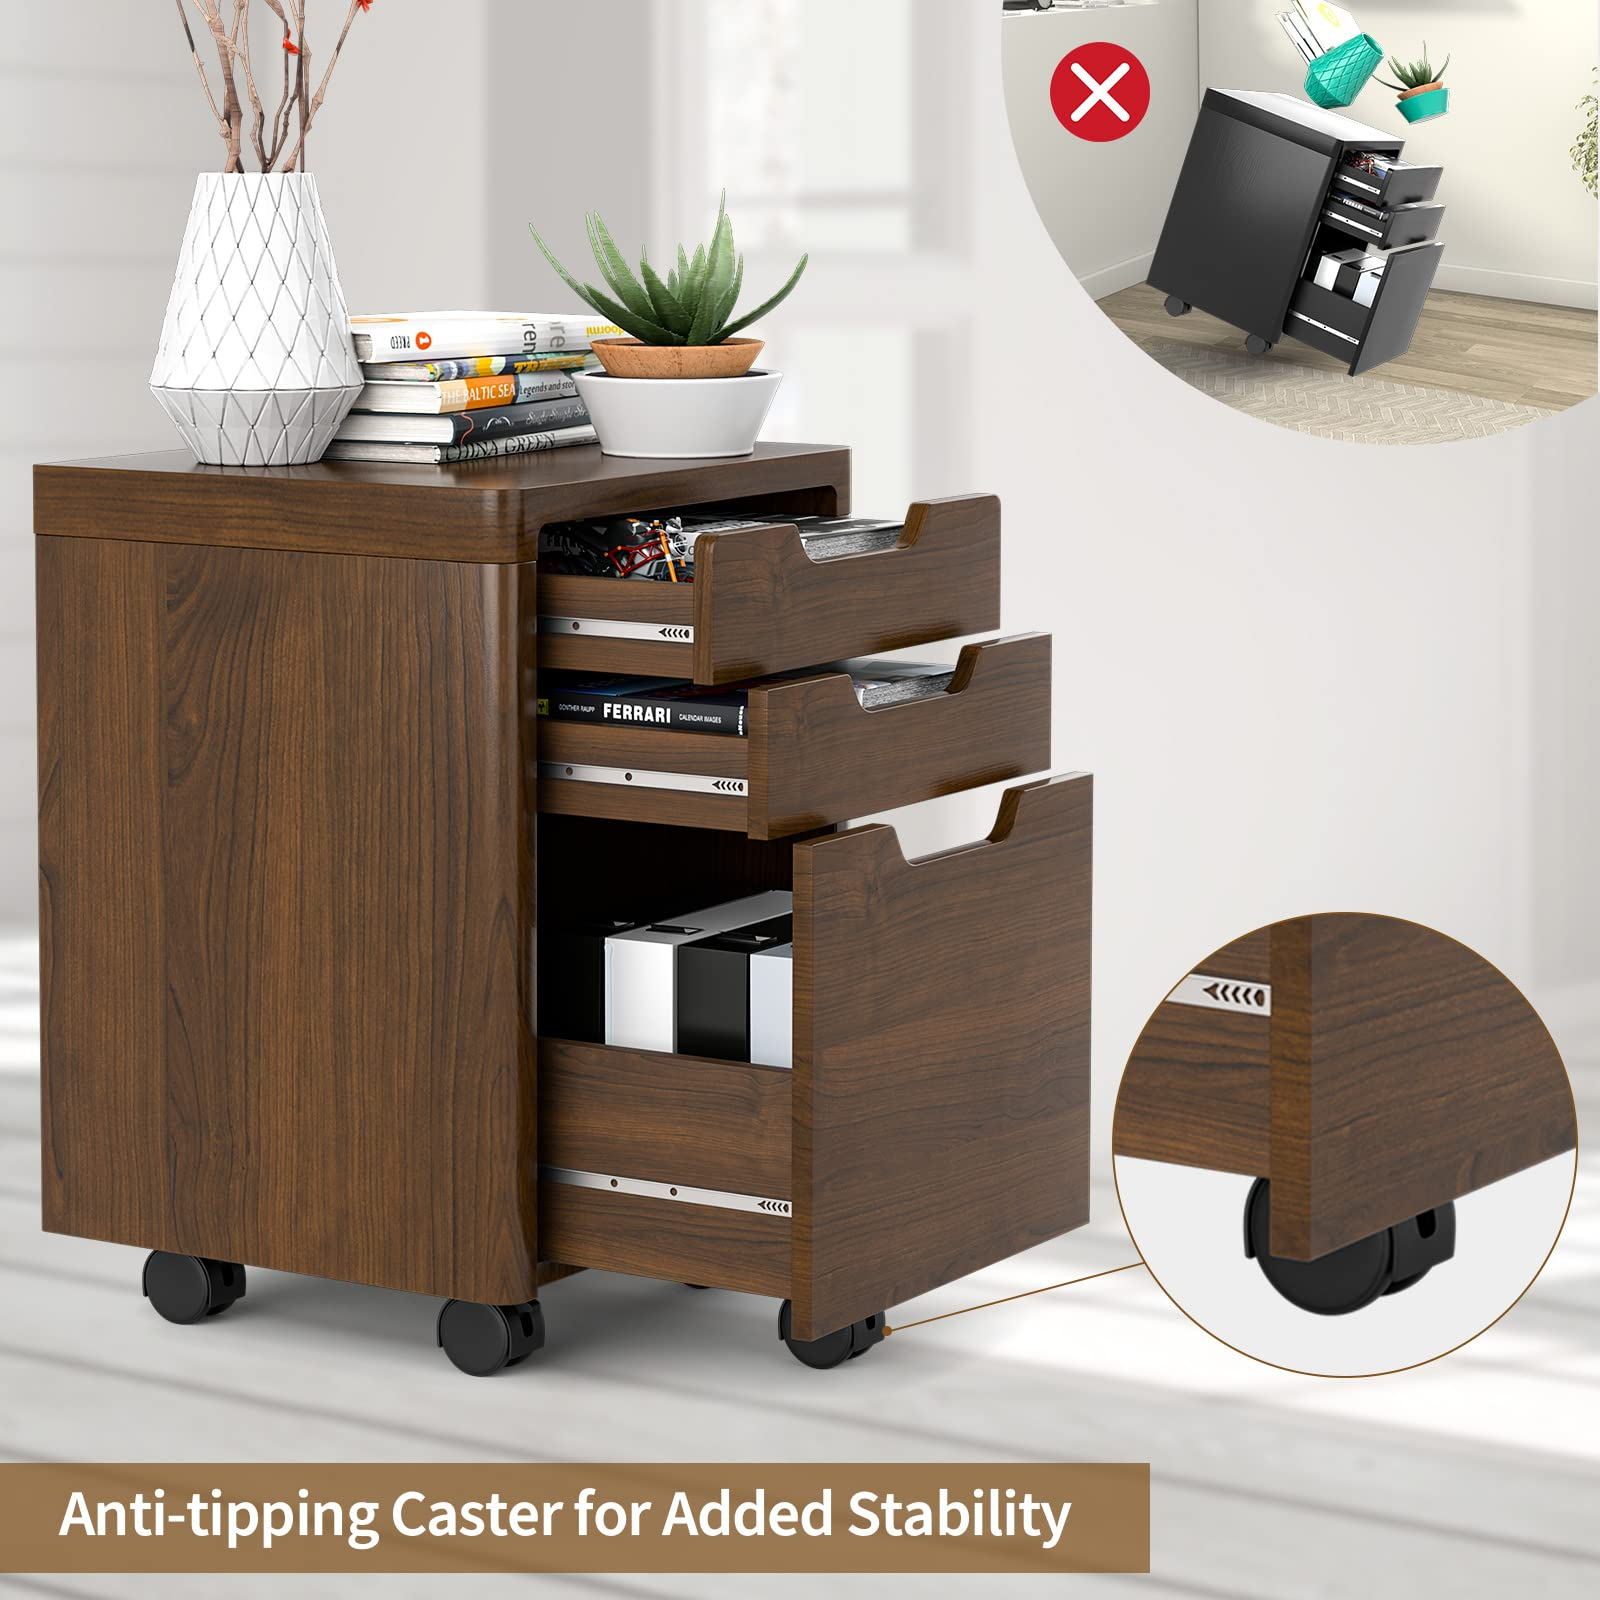 Giantex 3 Drawer Mobile File Cabinet Rolling Cabinets Filler with Lockable Casters